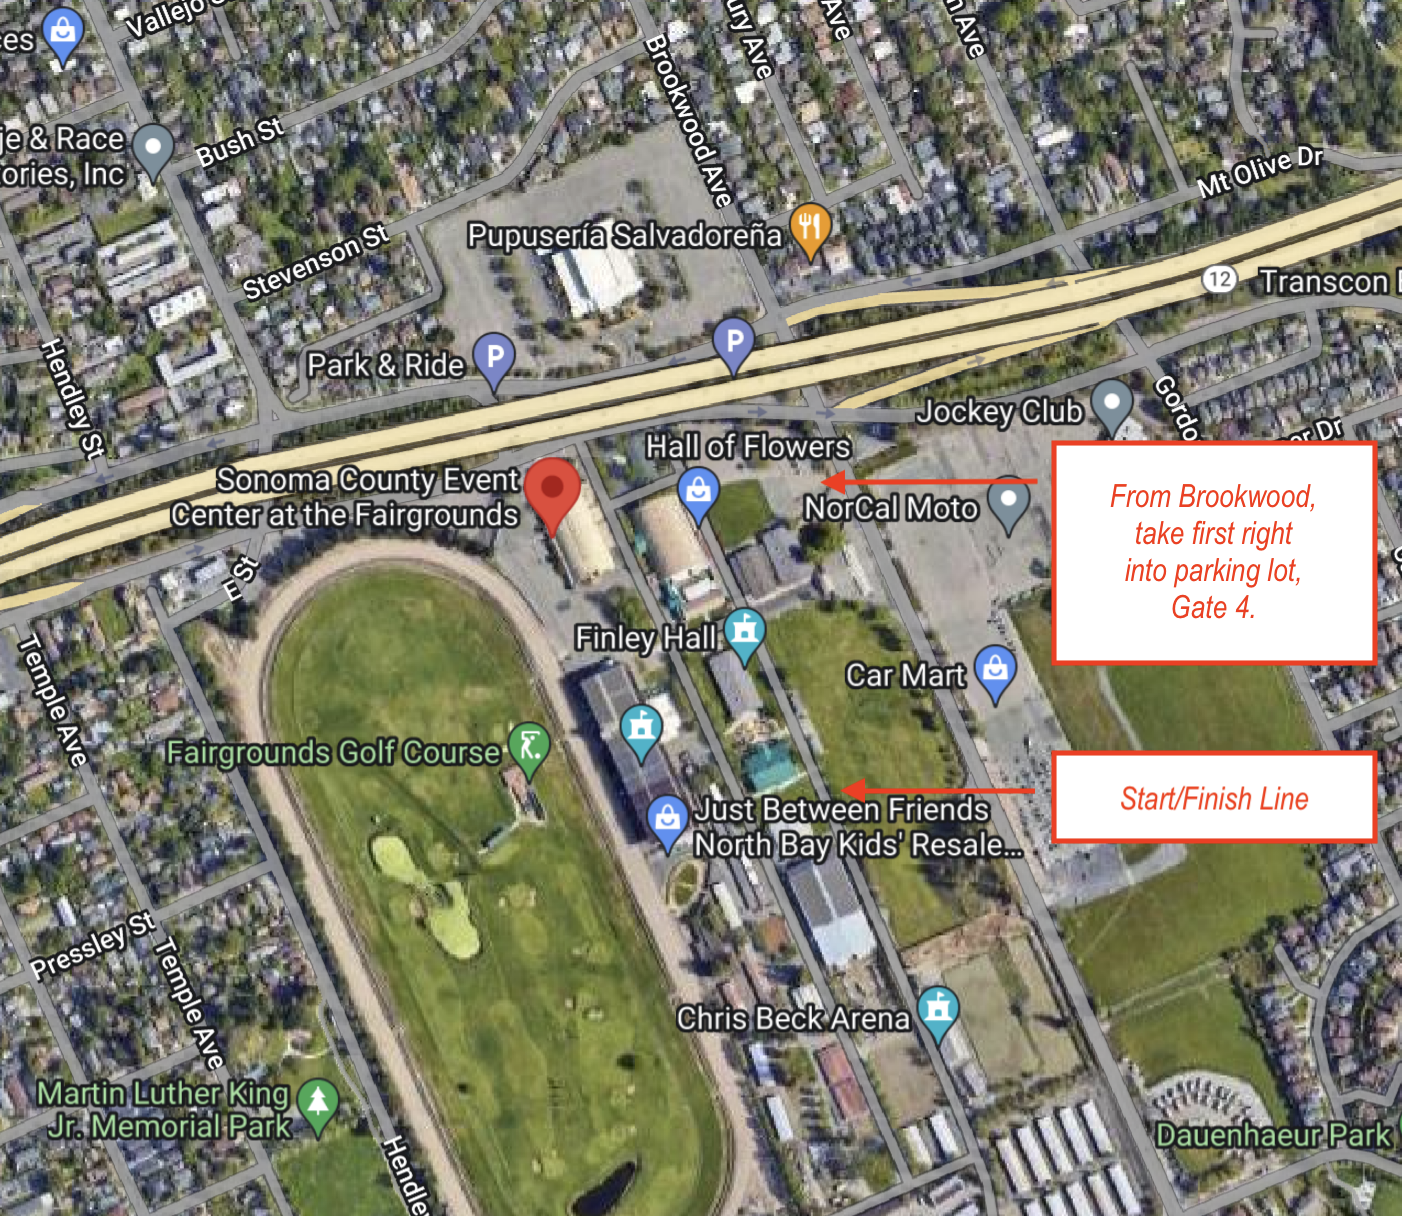 Directions to Tuesday Night Twilights (TNT) Criteriums at Sonoma County Fairgrounds. Park in the Northeast Parking lot with an entrance off of Brookwood through Gate 4.